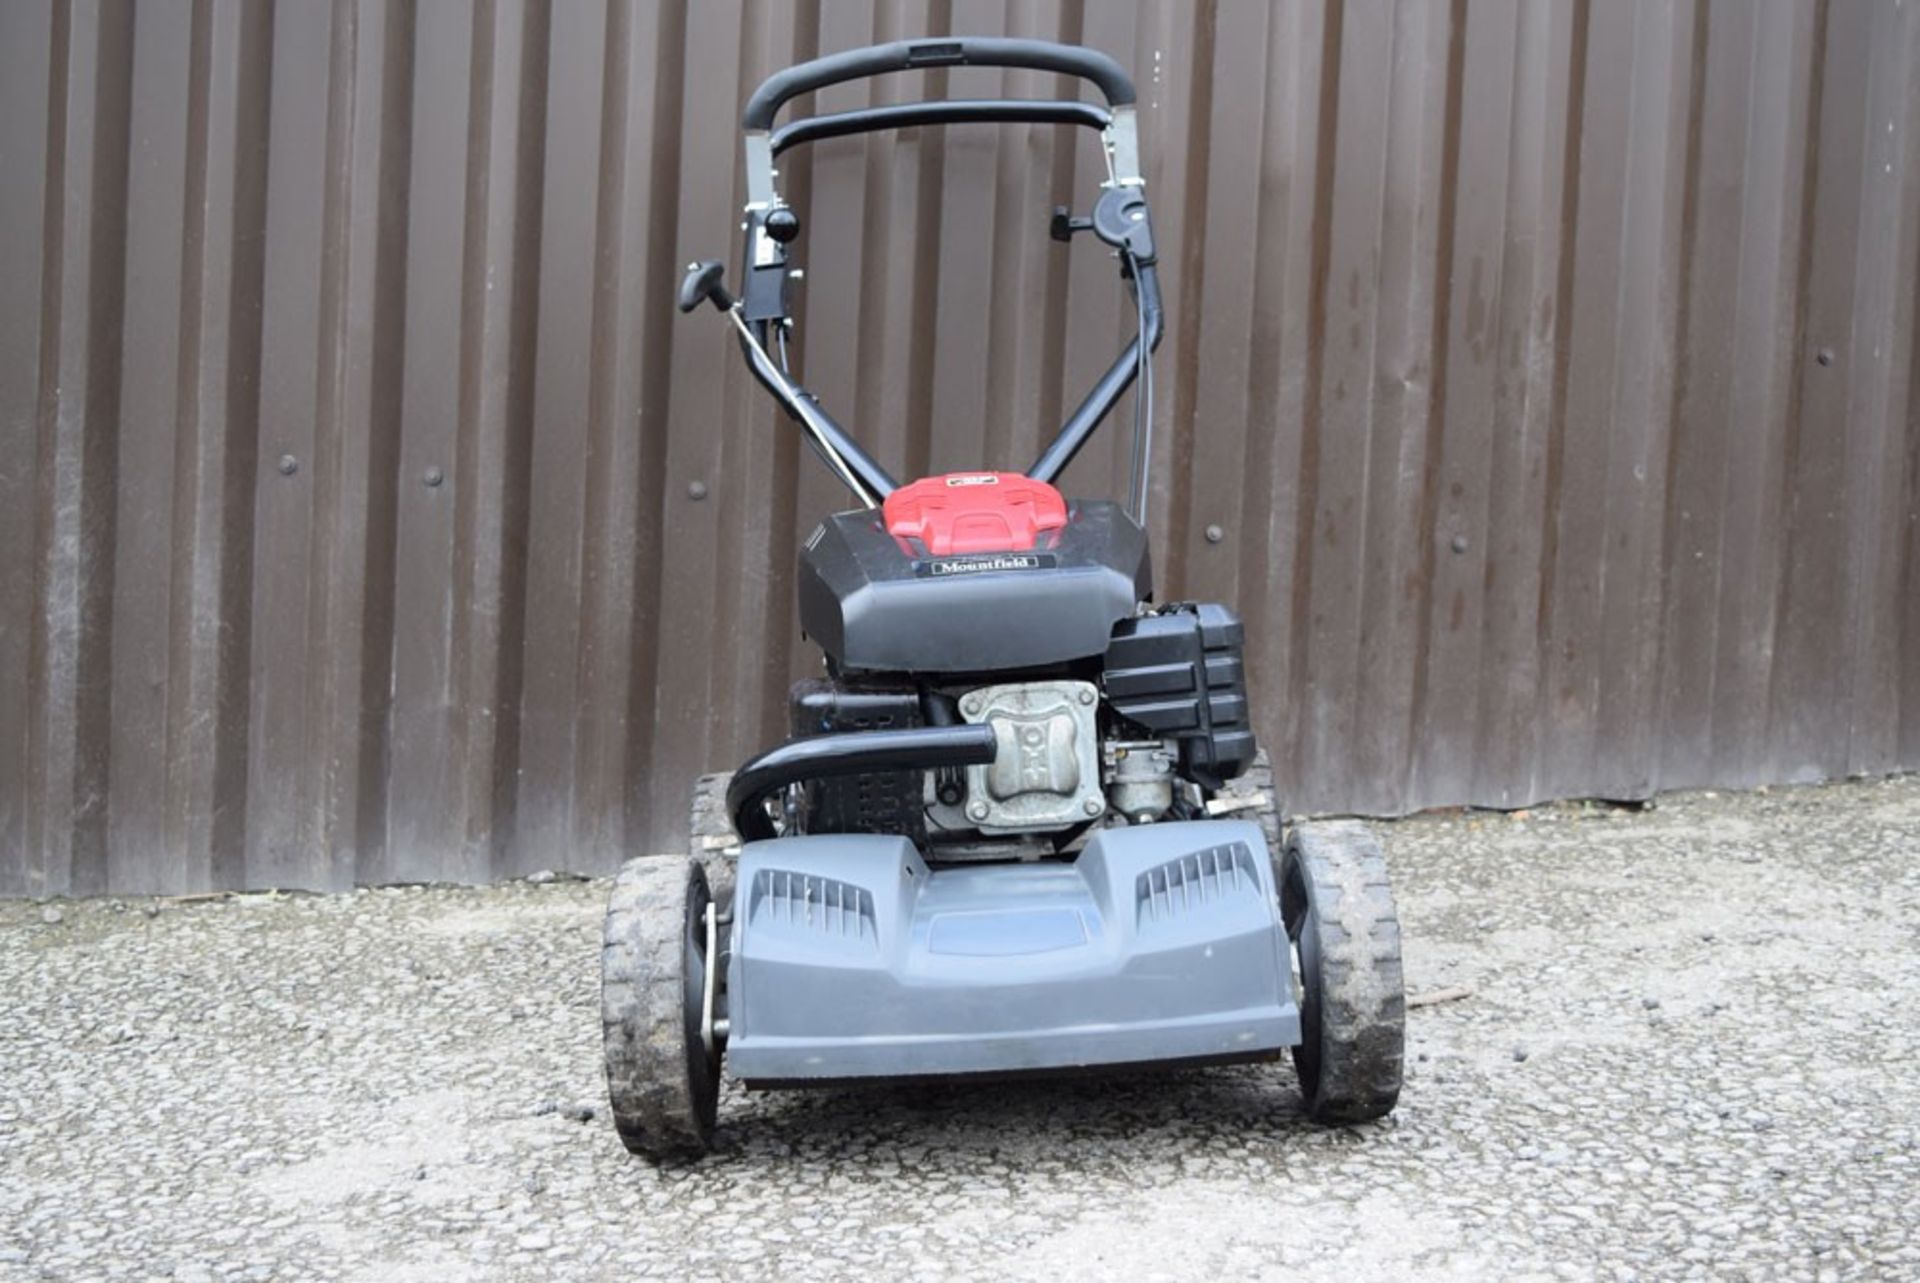 2009 Mountfield Multiclip 501 SP 48cm Self-Propelled Rotary Mower - Image 2 of 7